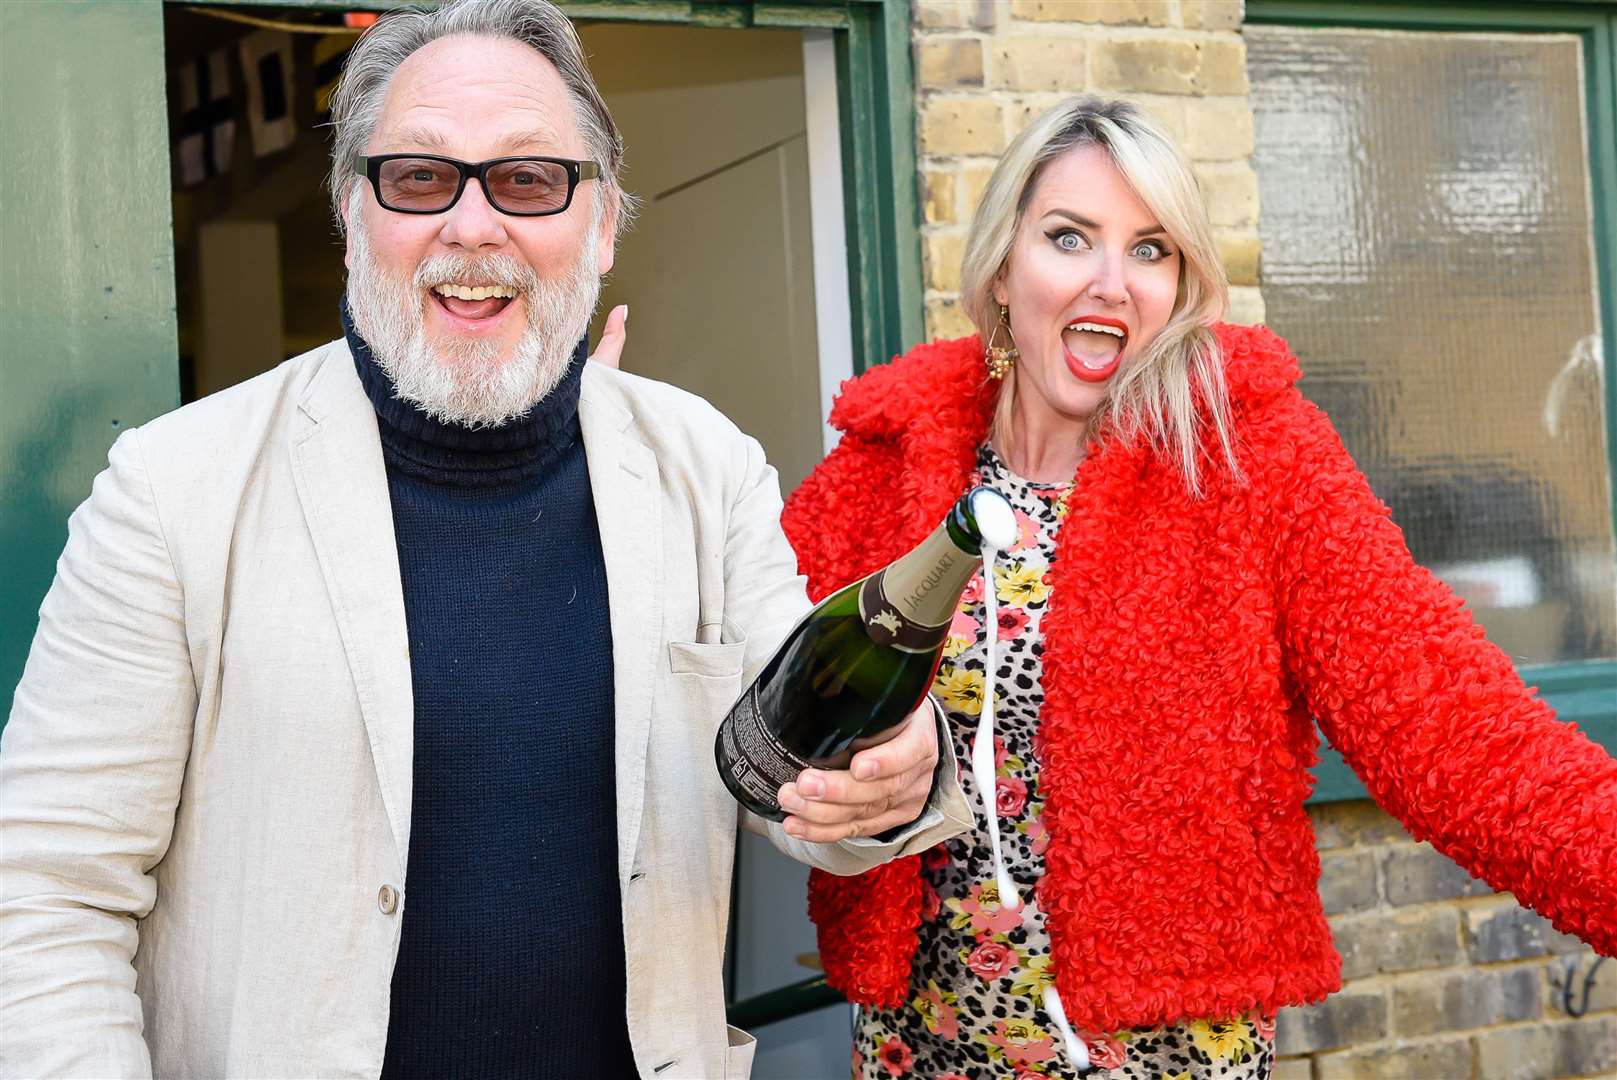 Jim Moir, AKA Vic Reeves, is a regular contributor to the Hootenanny, and his wife Nancy Sorrell has also been among the guests. Picture: Alan Langley